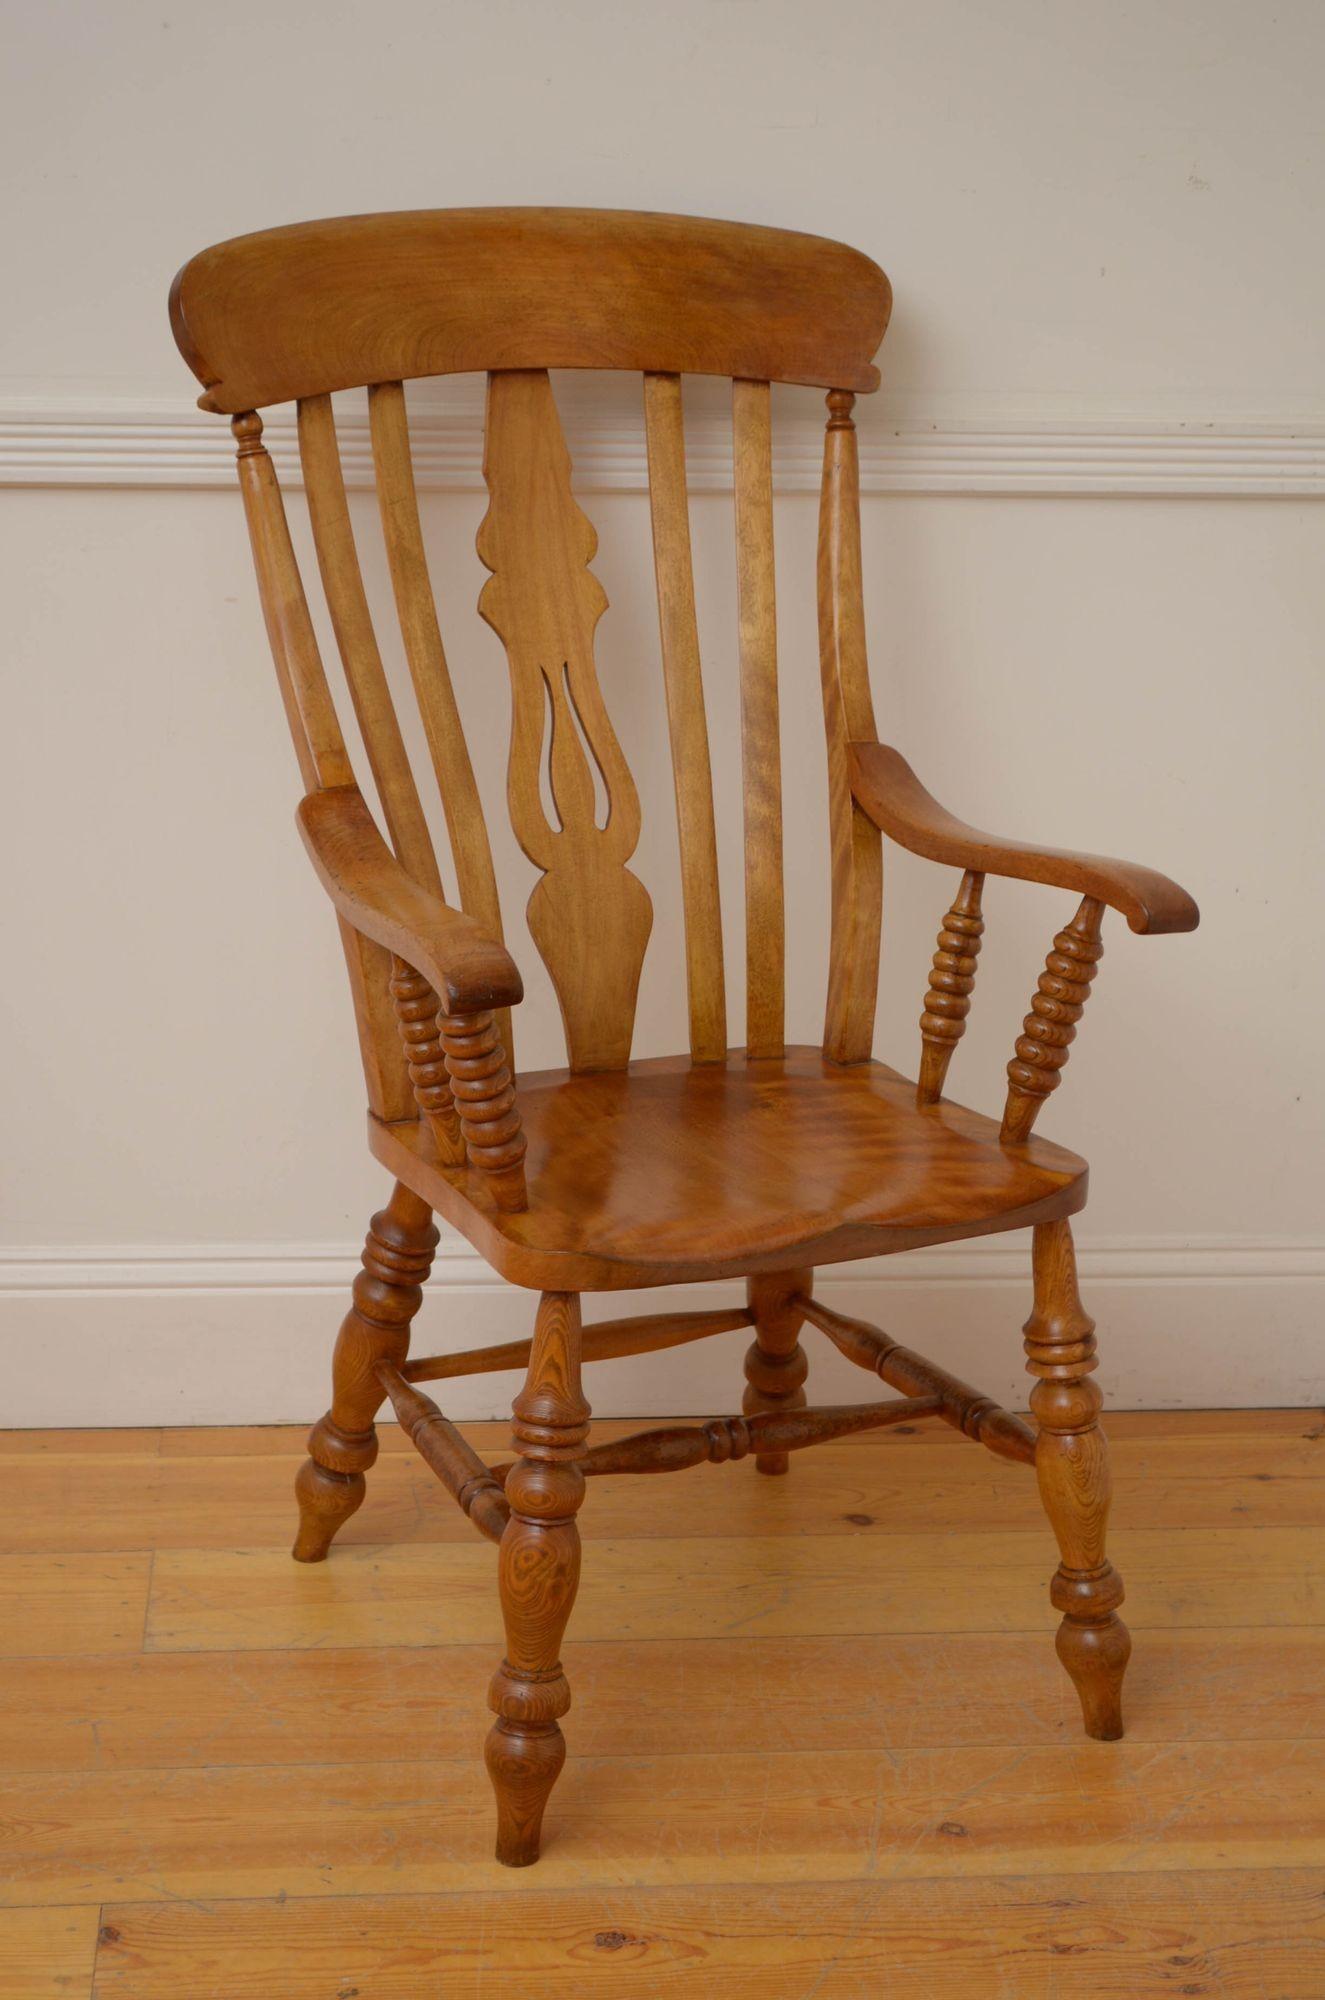 Sn084 Late Victorian Windsor chair in satinbirch, having shape top rail with carved centre support flanked by four slats, generous seat and open arms on bobbing uprights, all standing on four turned and ringed legs united by four stretchers. This